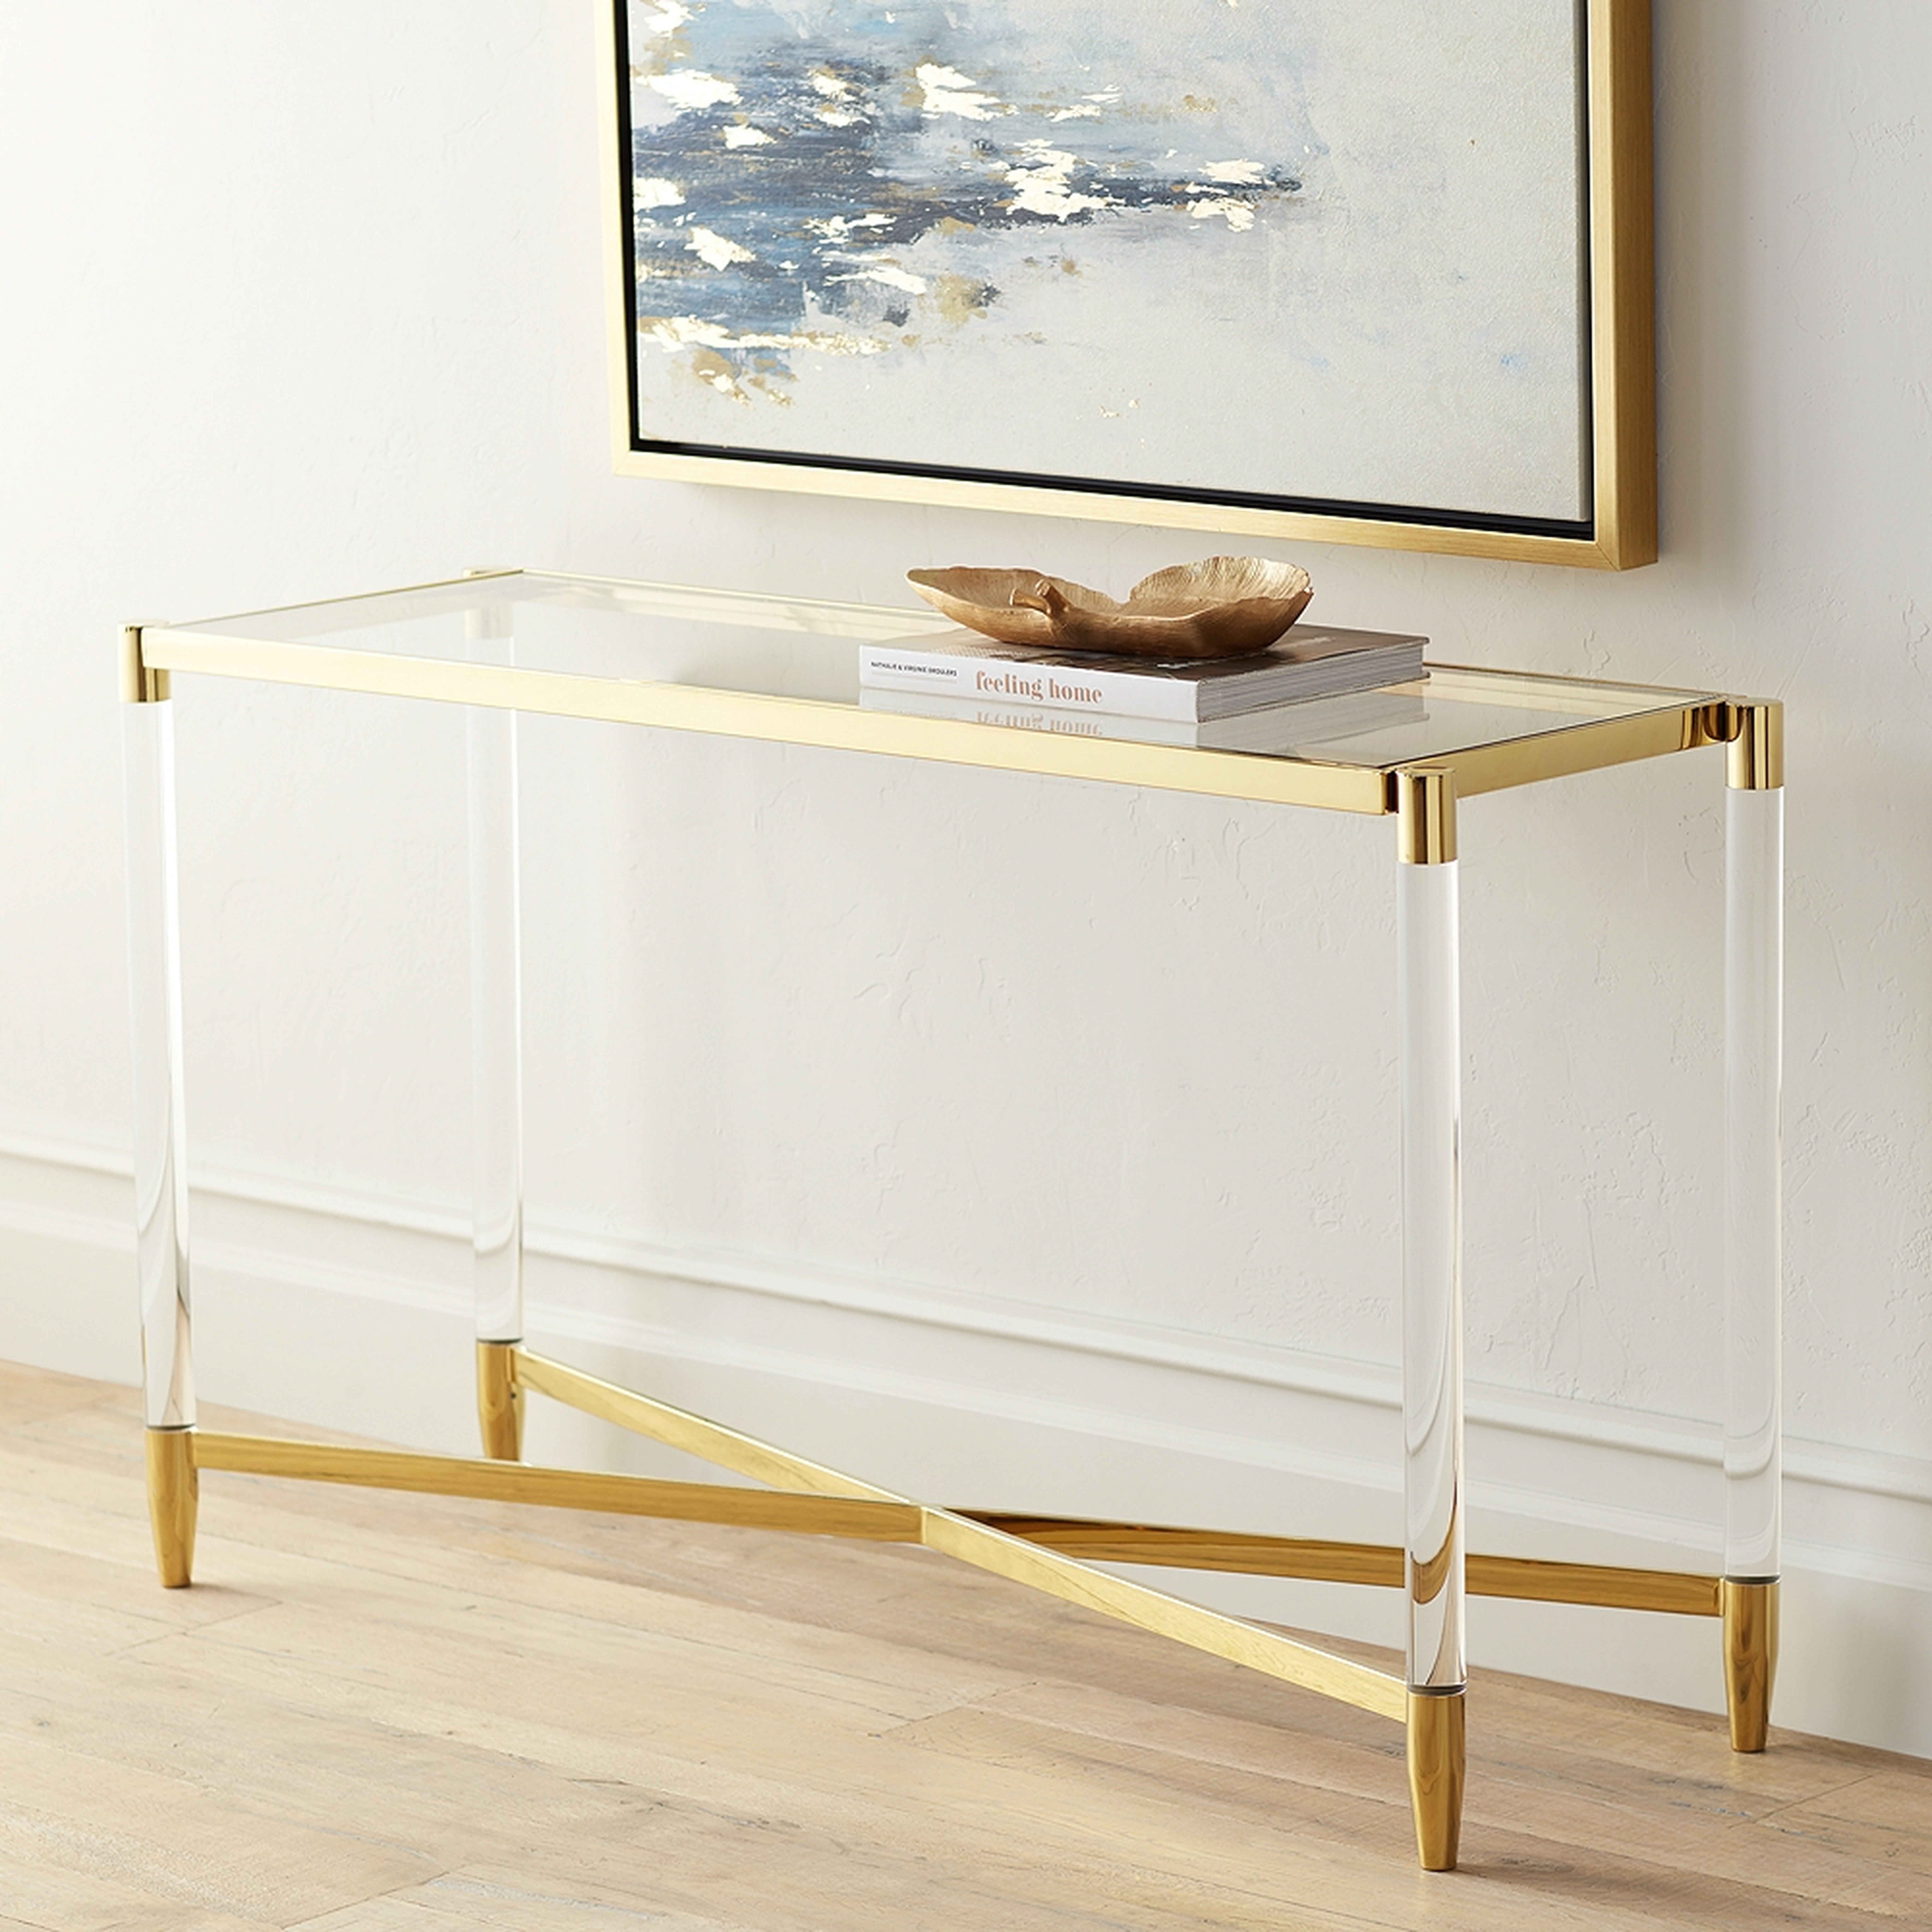 Stefania Gold and Acrylic Console Table - Style # 55K06 - Lamps Plus